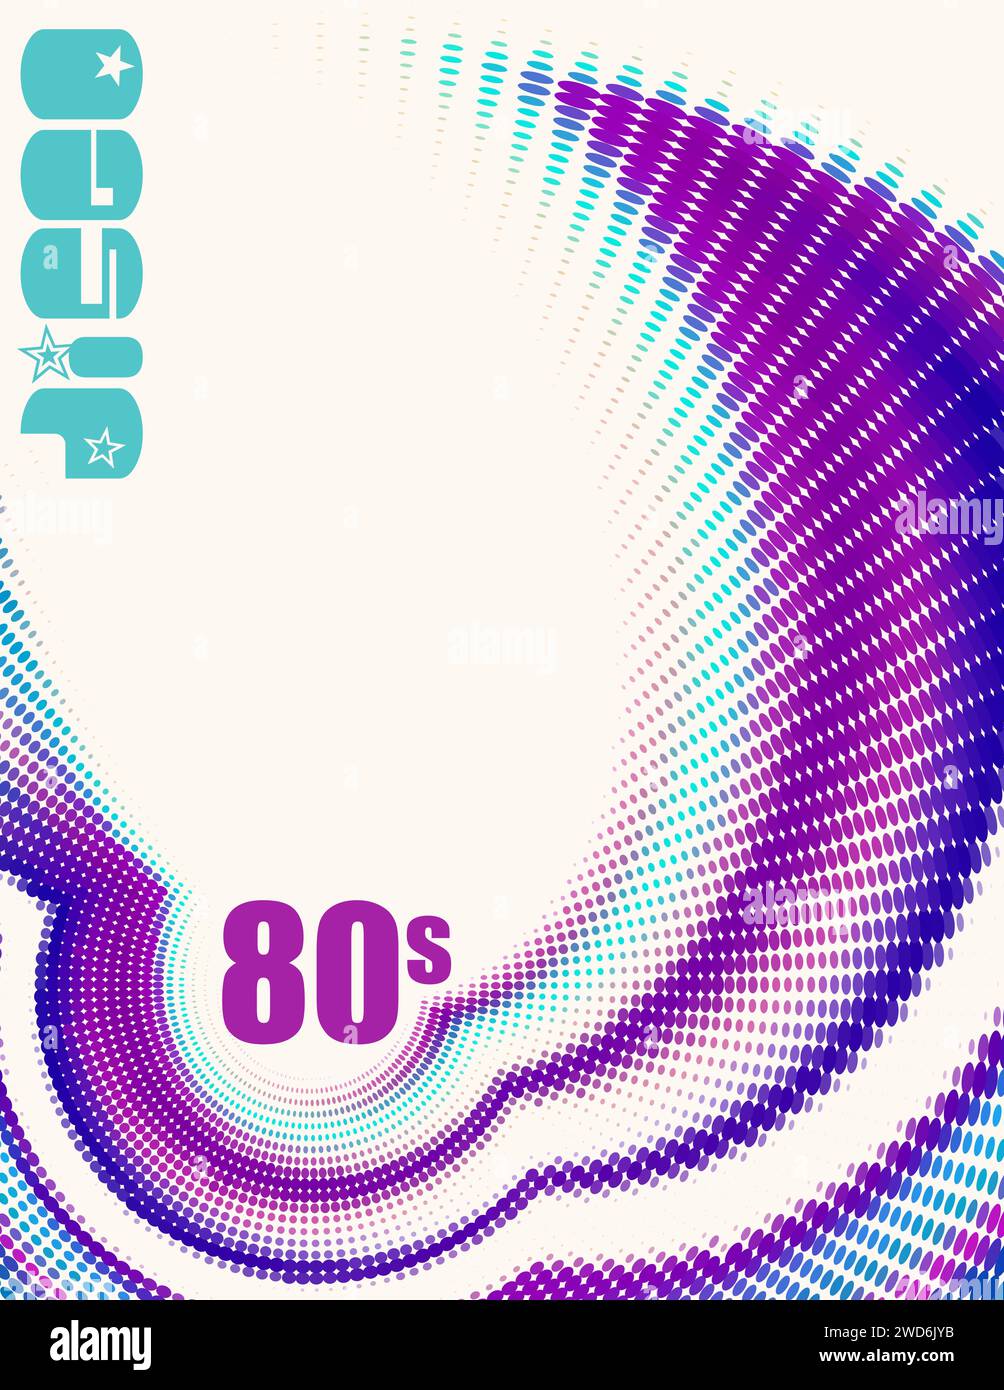 Halftone background with radial dotted swirl for 80s disco party. Vertical vector graphic pattern Stock Vector